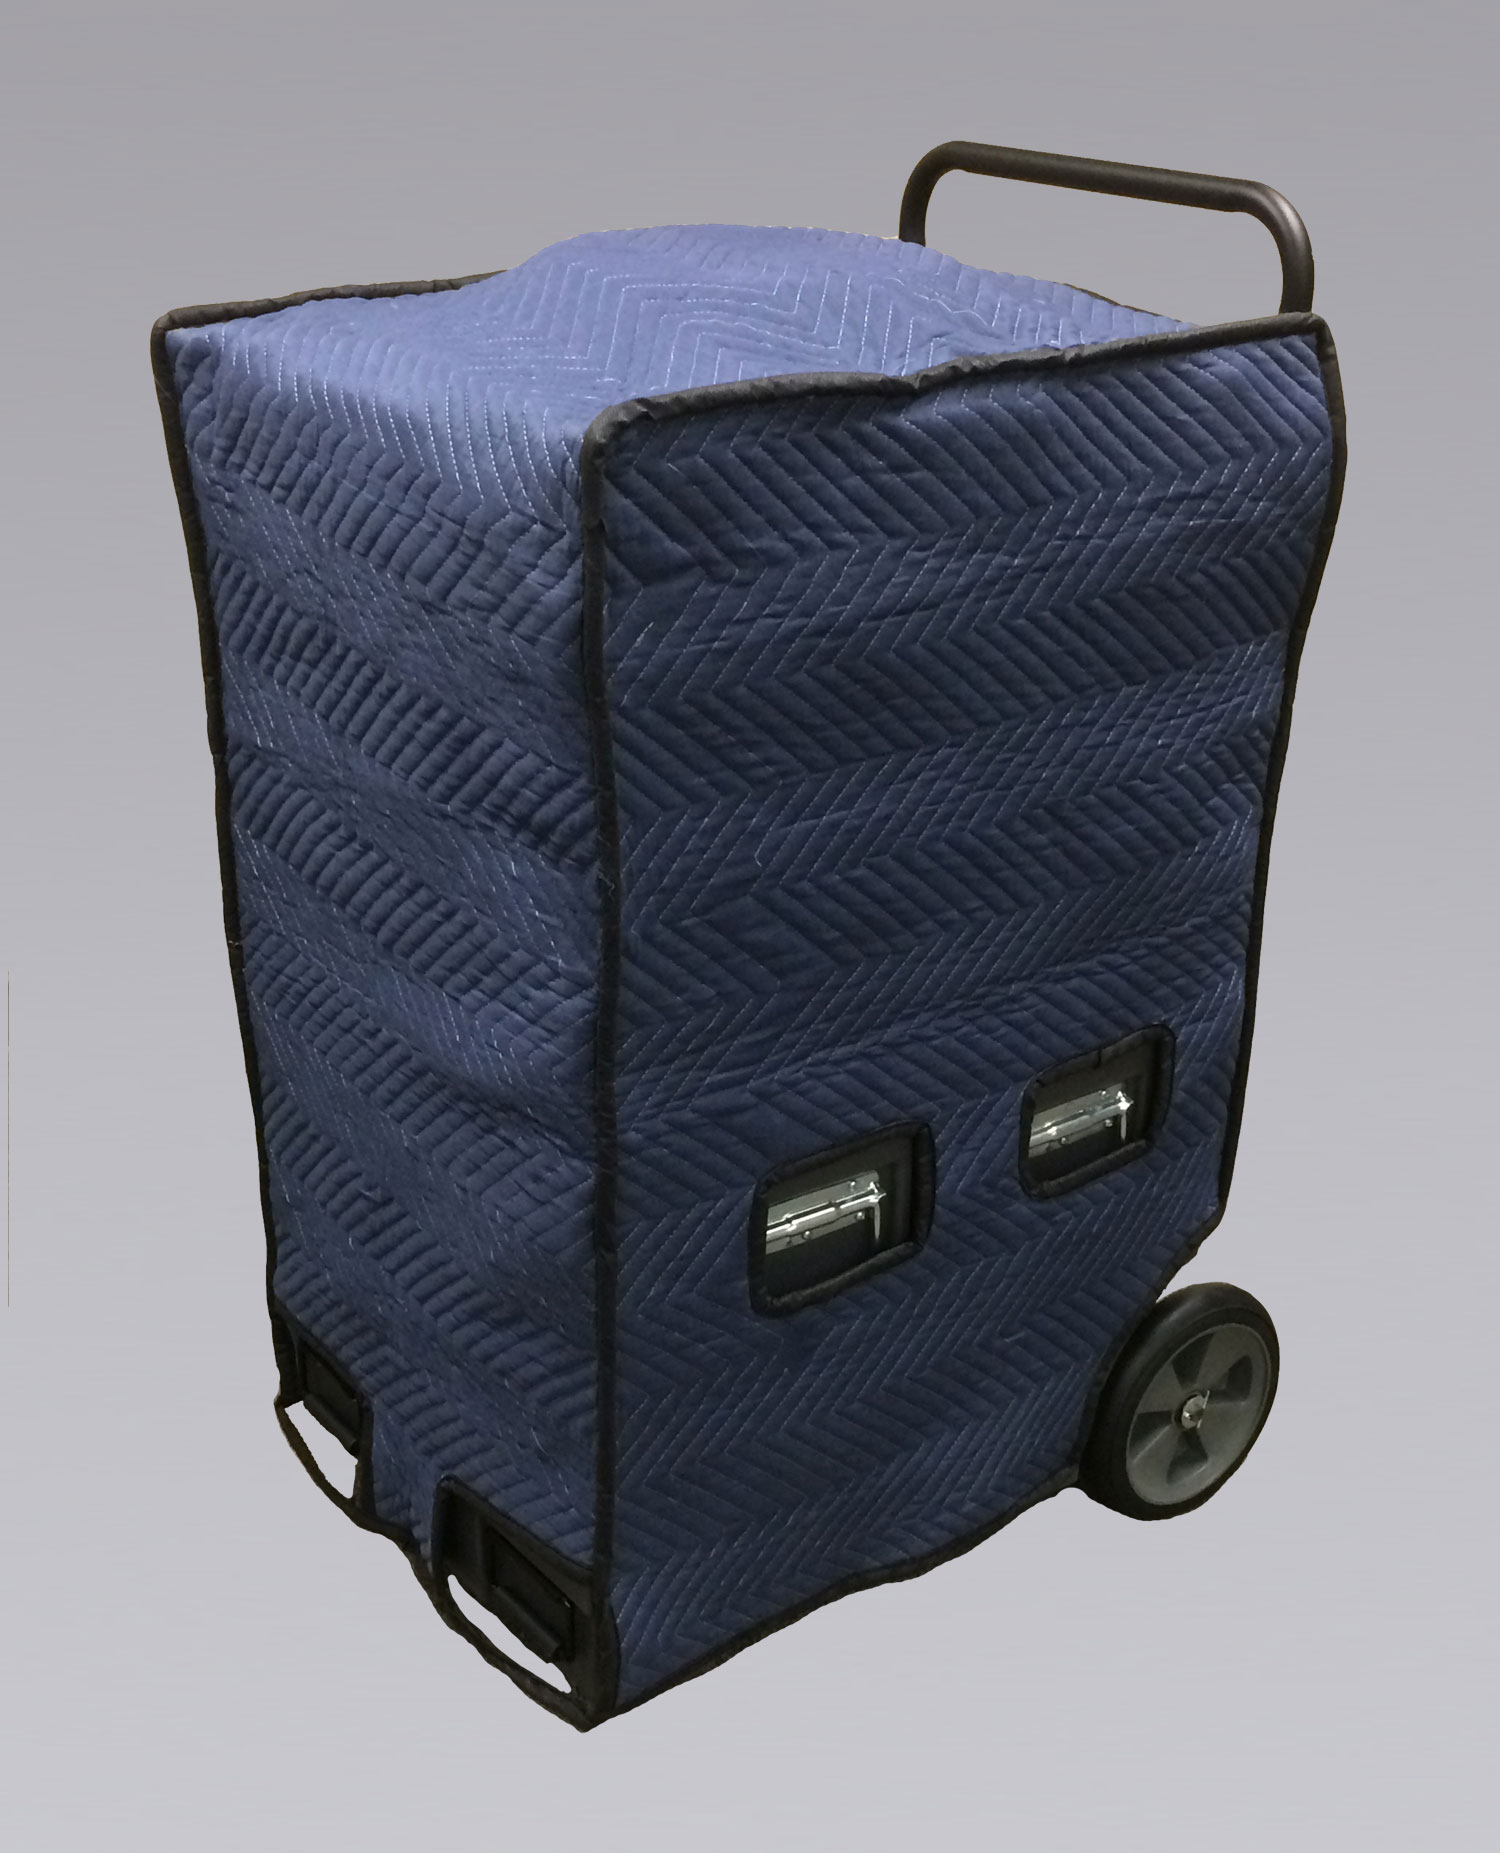 NIKRO 862392 & 862538 - Transport Covers - Air Duct Cleaning Equipment & Supplies 
        Optional Items 
        